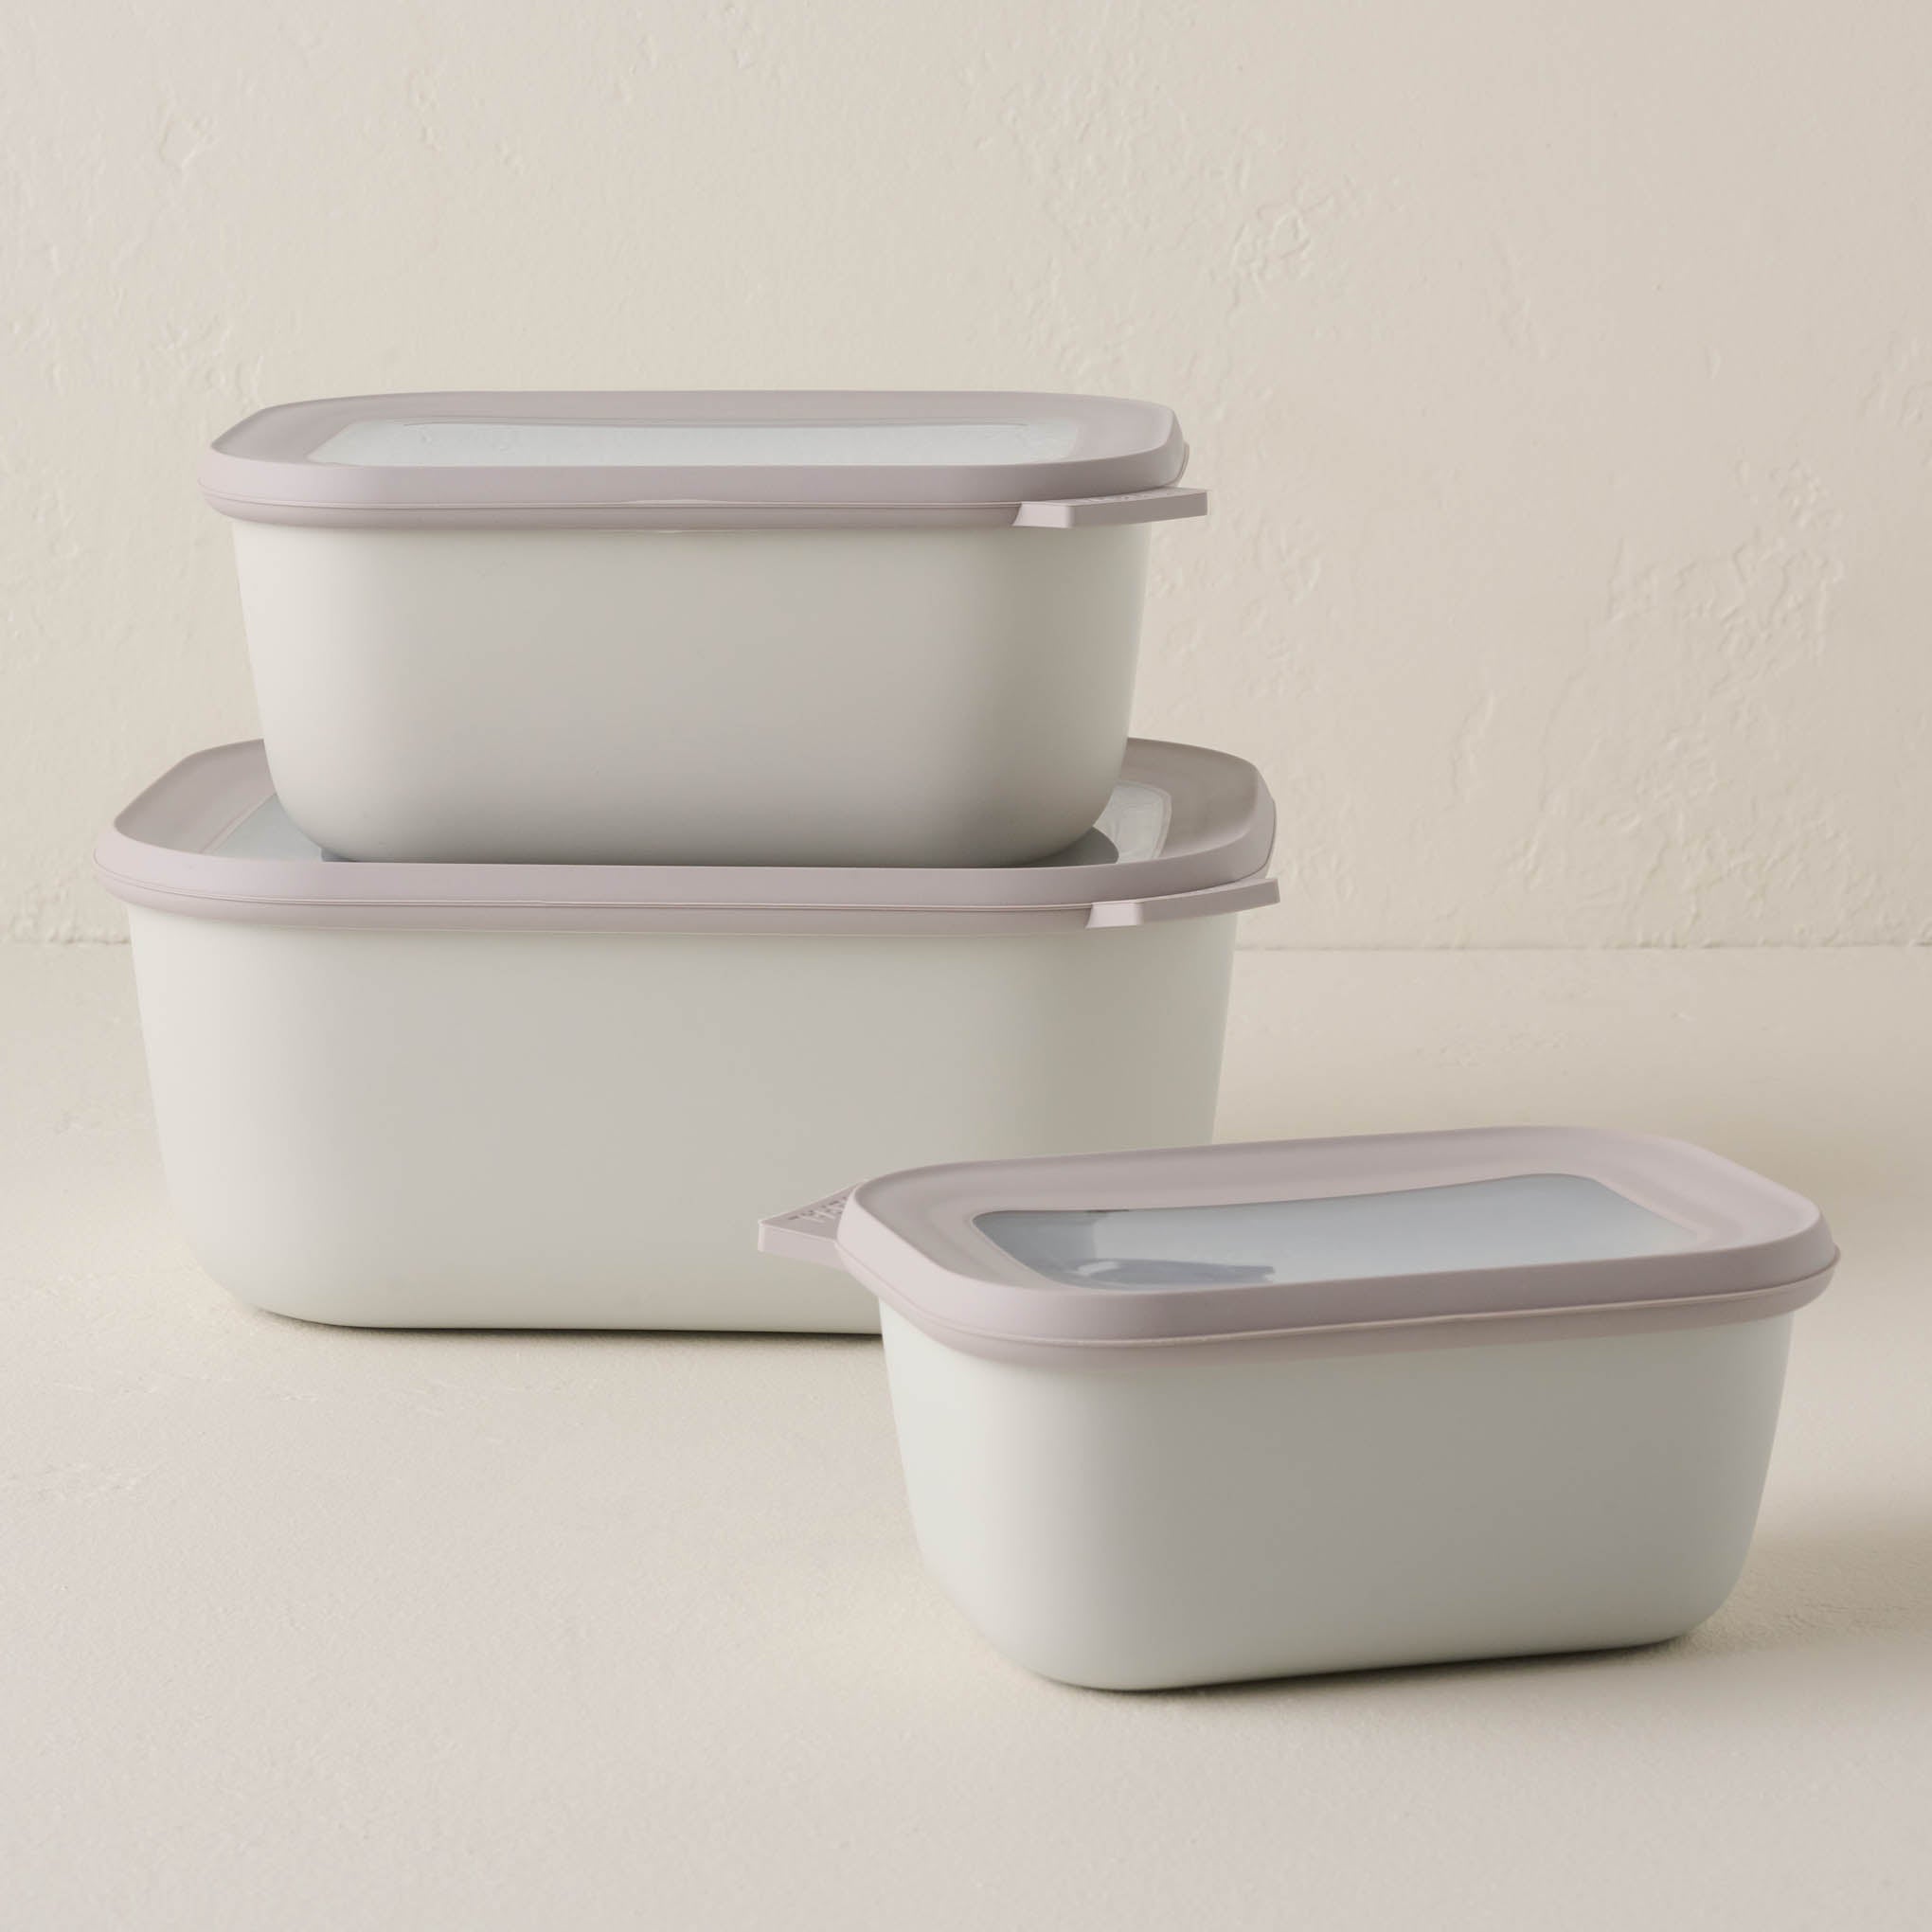 Stacked Set of Three Deep Nordic White Mepal Food Storage Containers